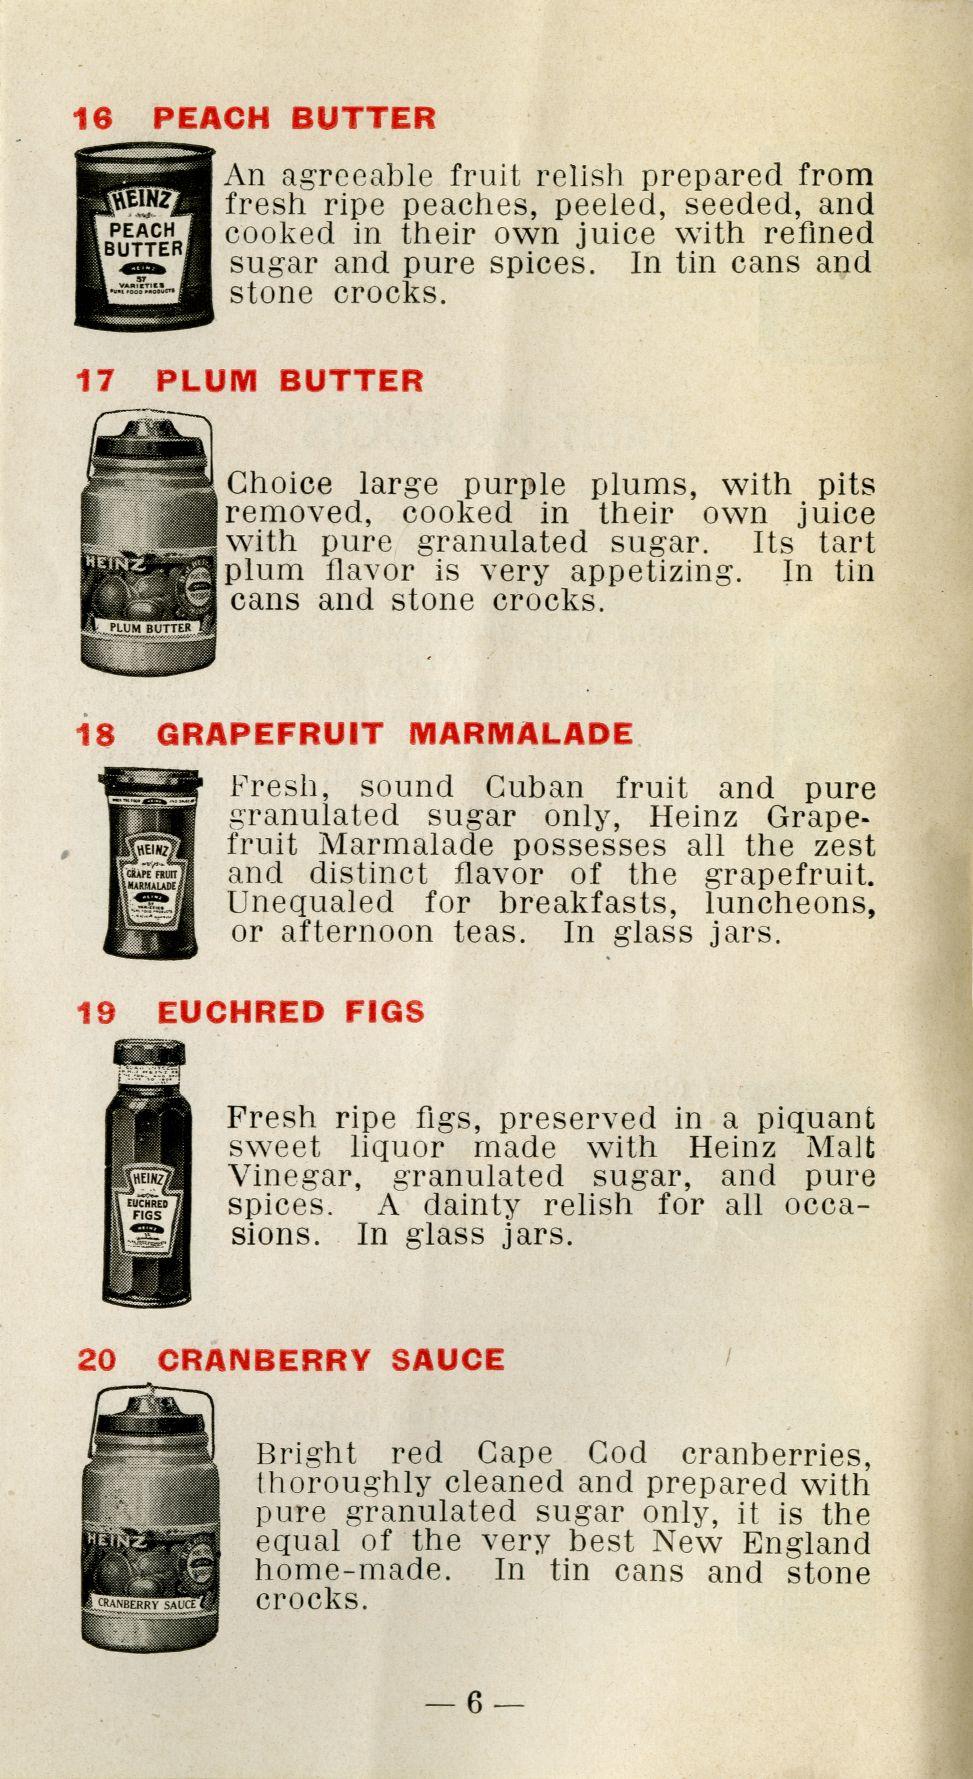 An agreeable fruit relish prepared from fresh ripe peaches, peeled, seeded, and cooked in their own juice with refined sugar and pure spices. In tin cans and stone crocks.